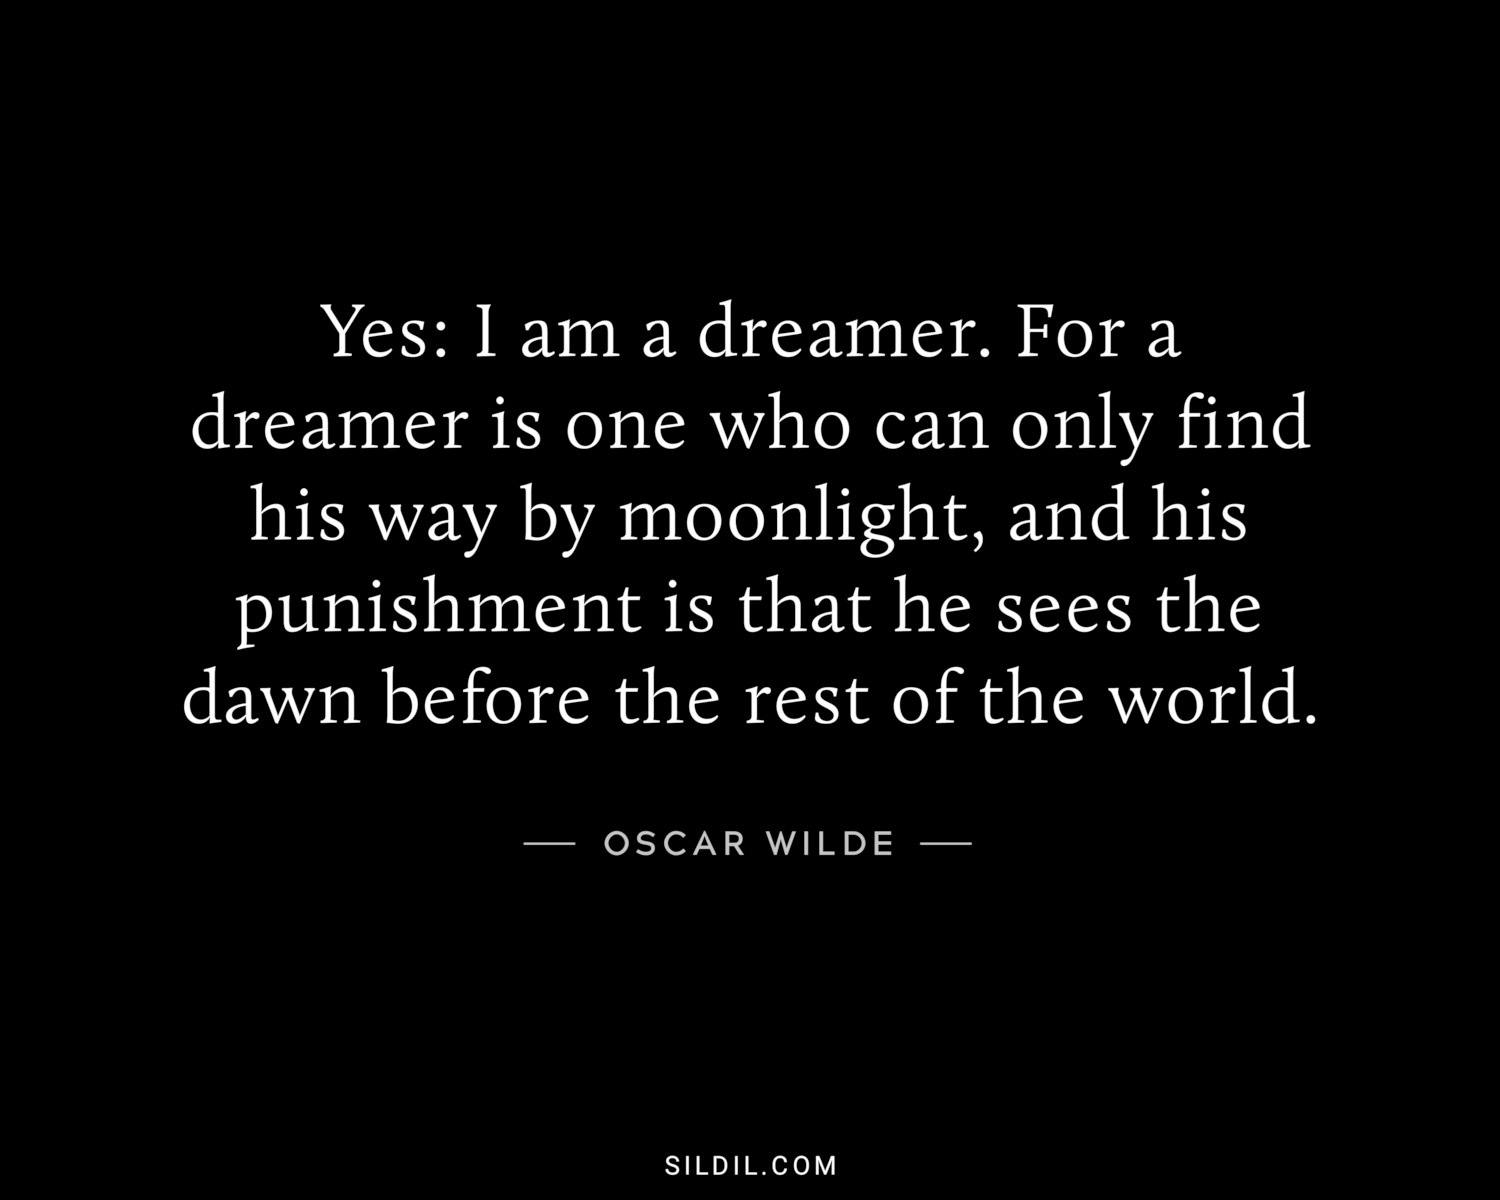 Yes: I am a dreamer. For a dreamer is one who can only find his way by moonlight, and his punishment is that he sees the dawn before the rest of the world.